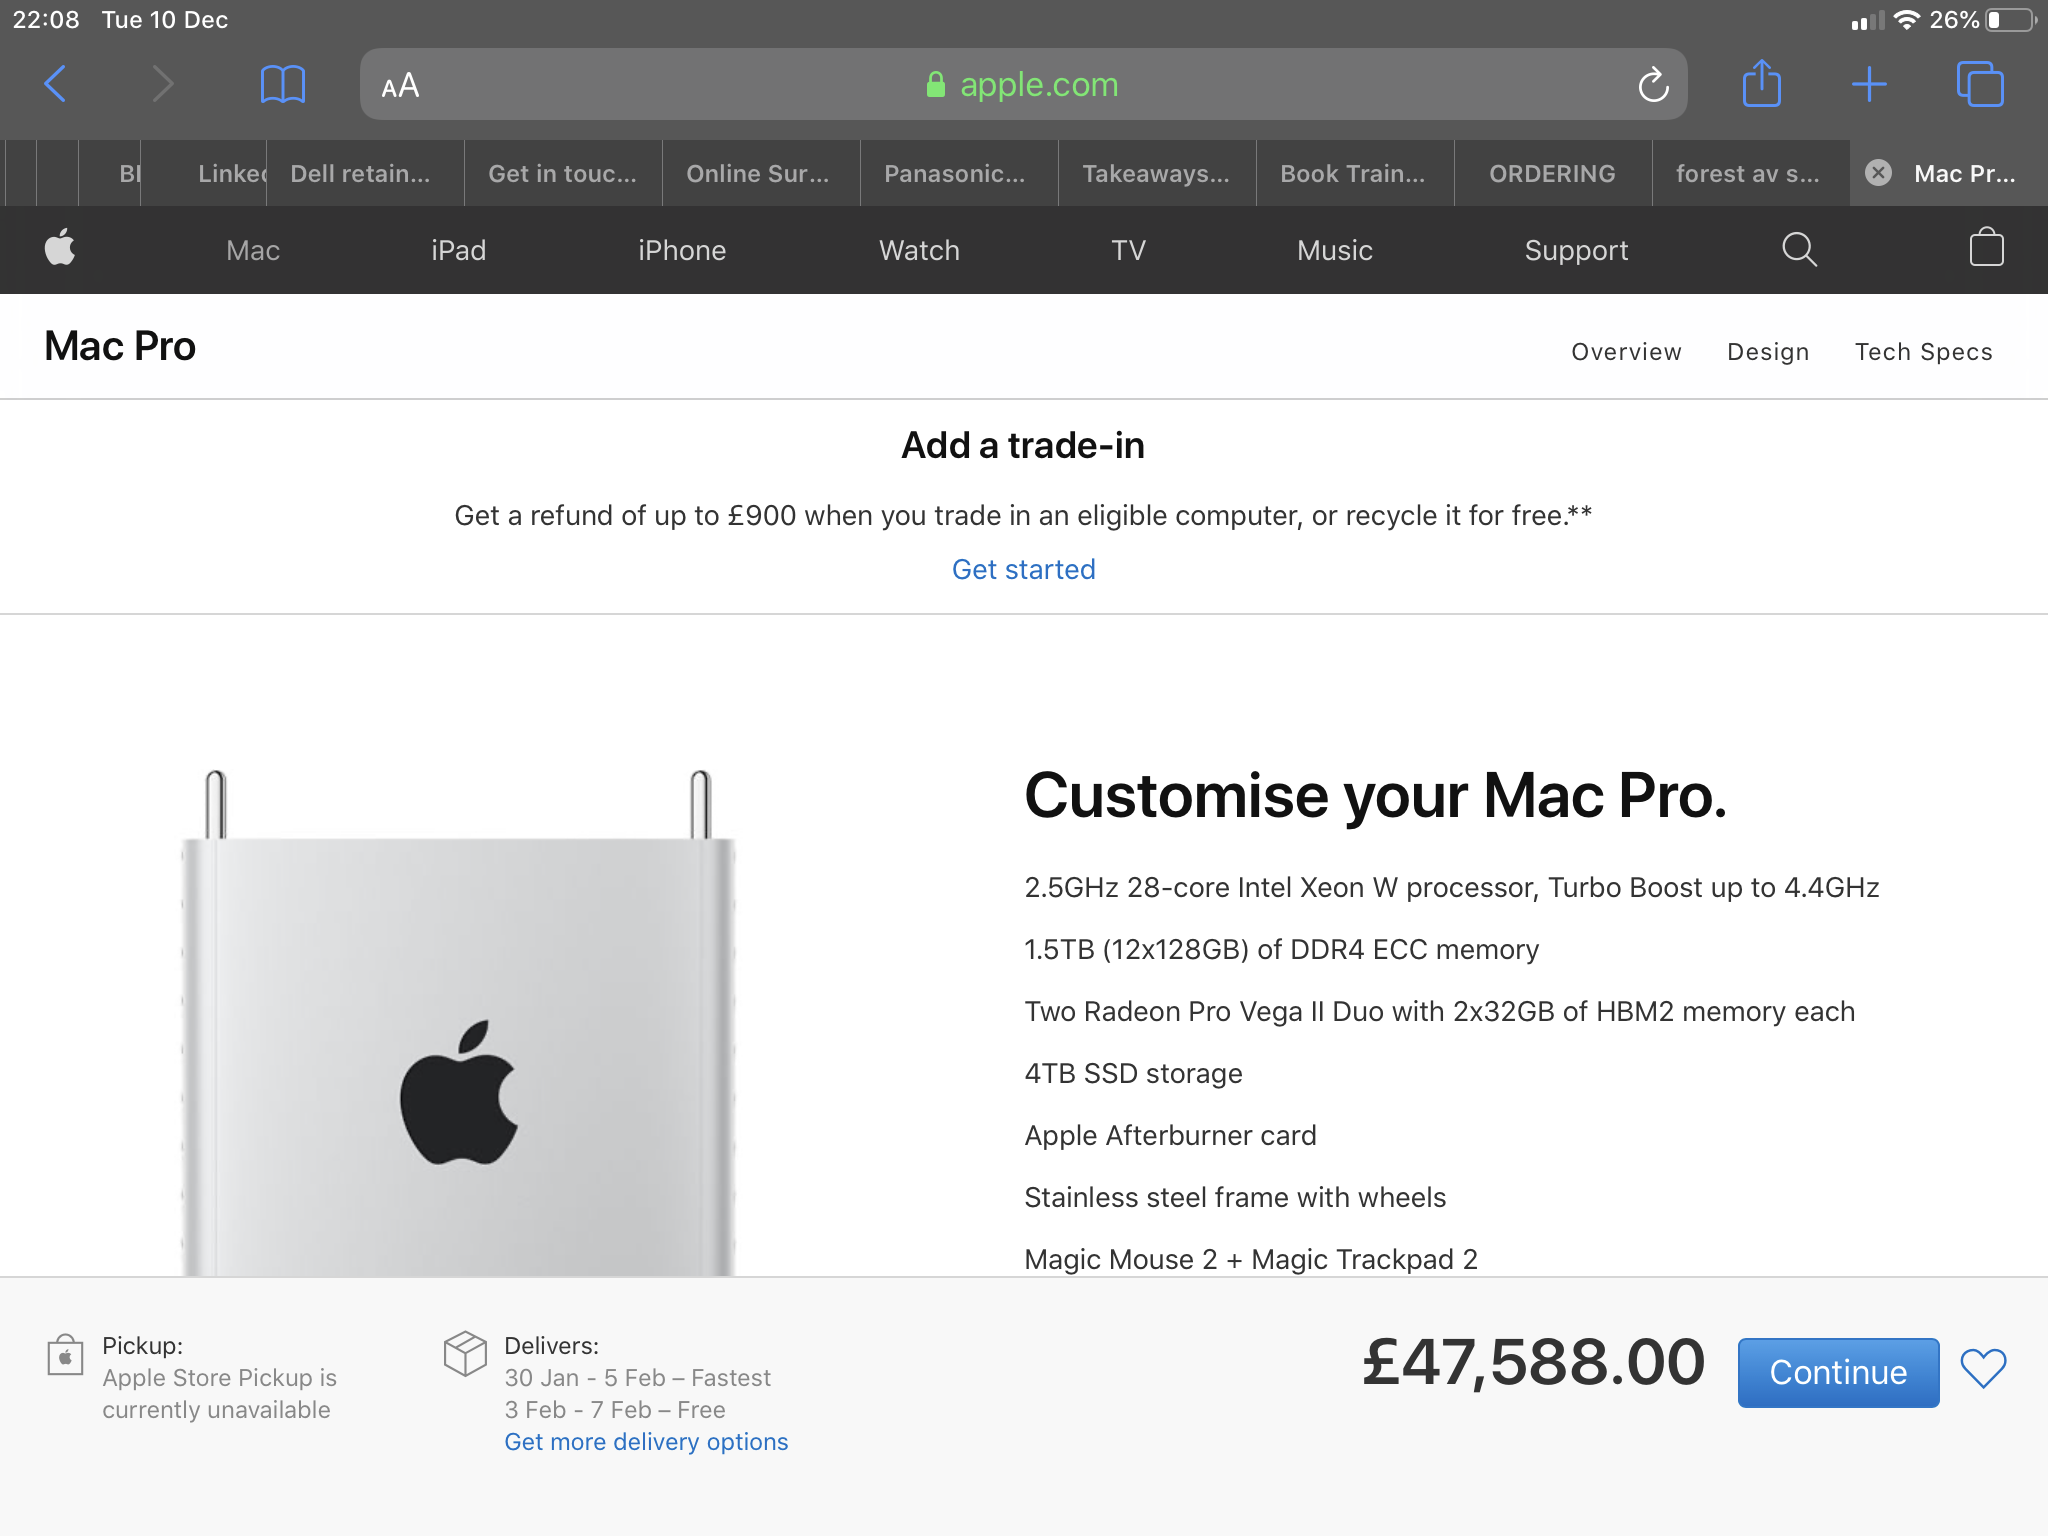 So who’s getting a new Mac Pro? - Page 1 - Computers, Gadgets & Stuff - PistonHeads